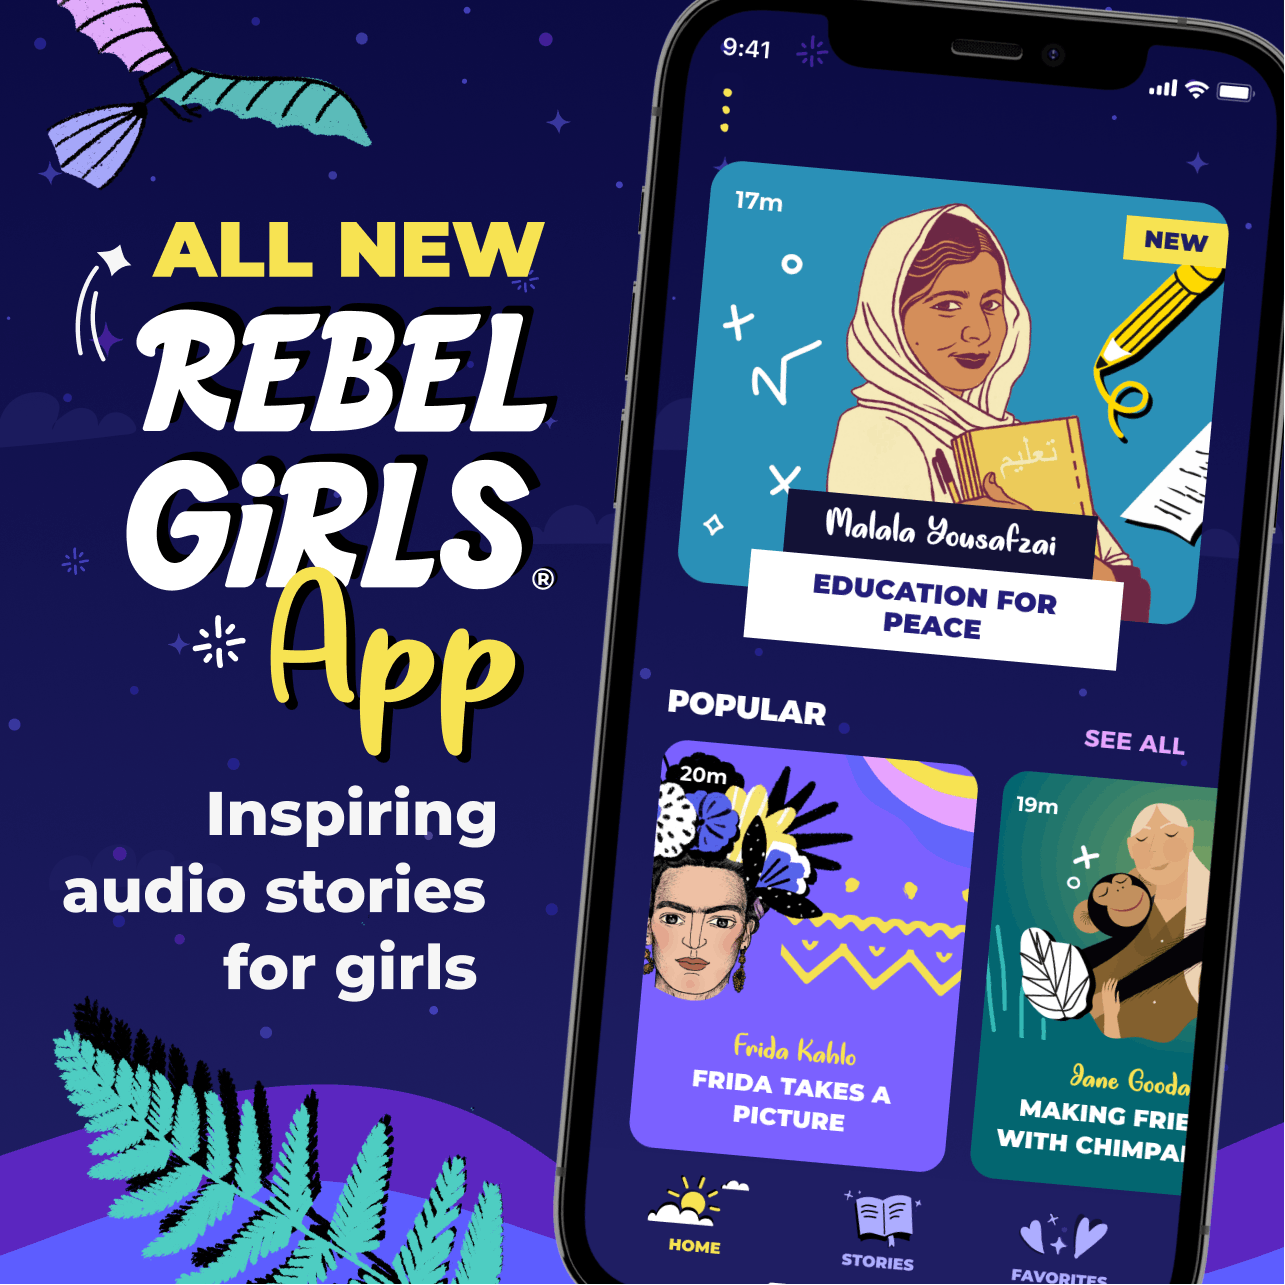 A New Home For Rebel Girls!